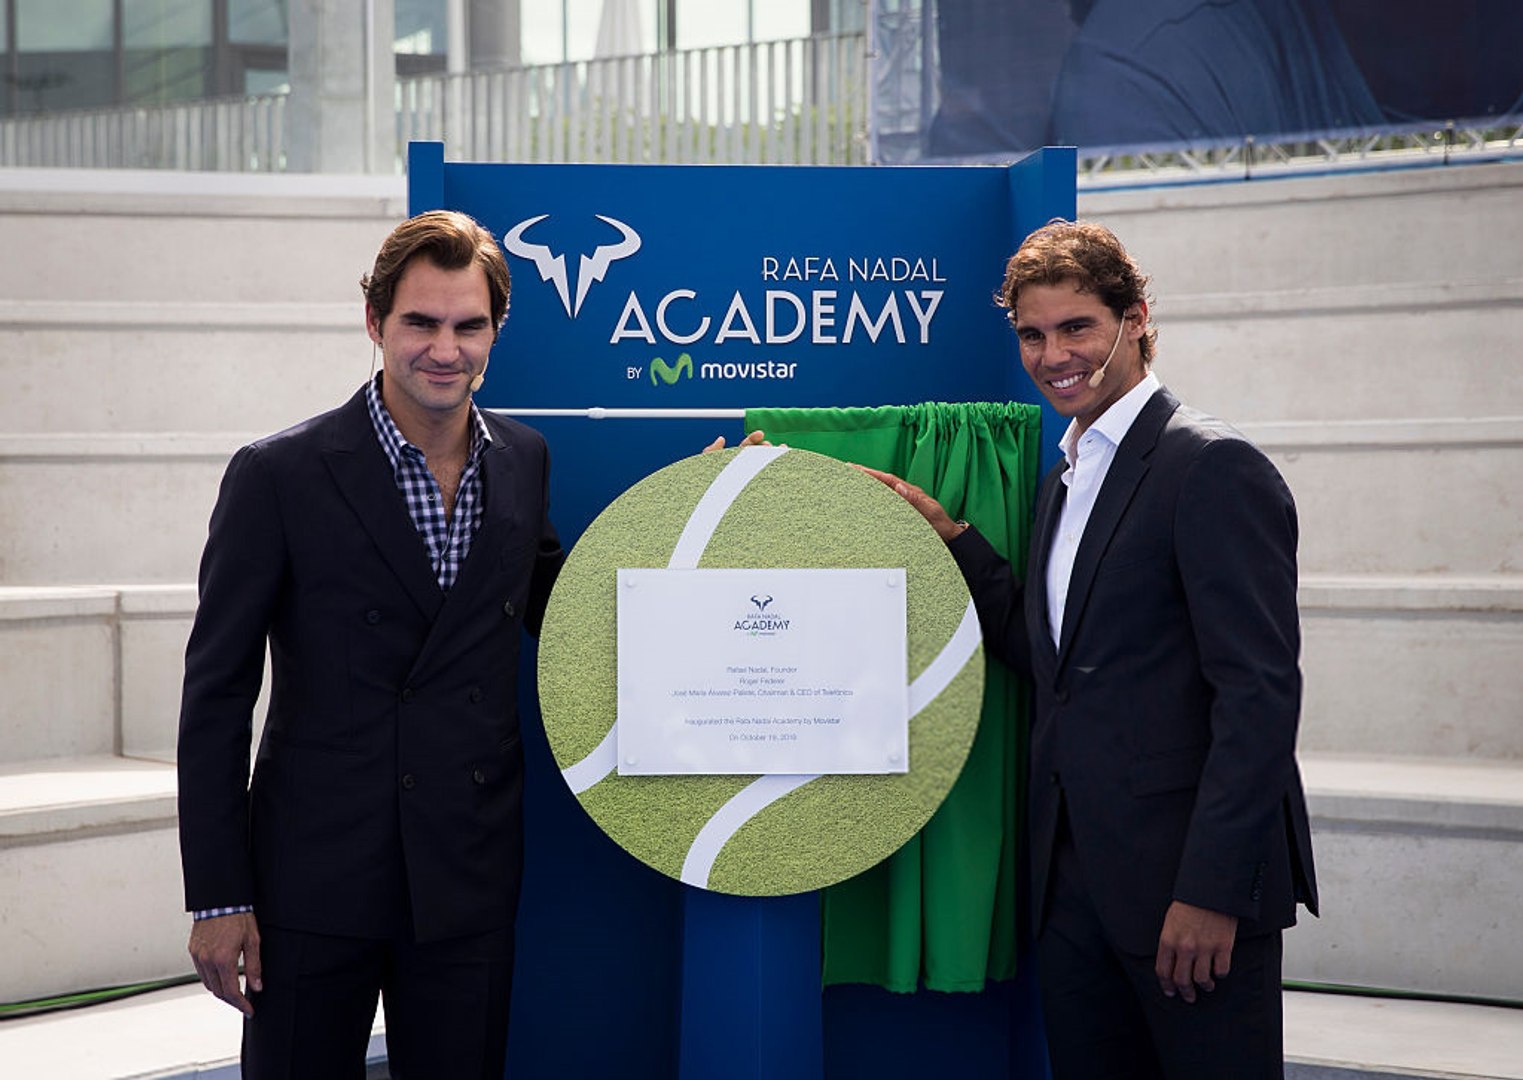 Rafael Nadal and Roger Federer at the Opening Ceremony of Rafa Nadal Academy  in Manacor - video Dailymotion